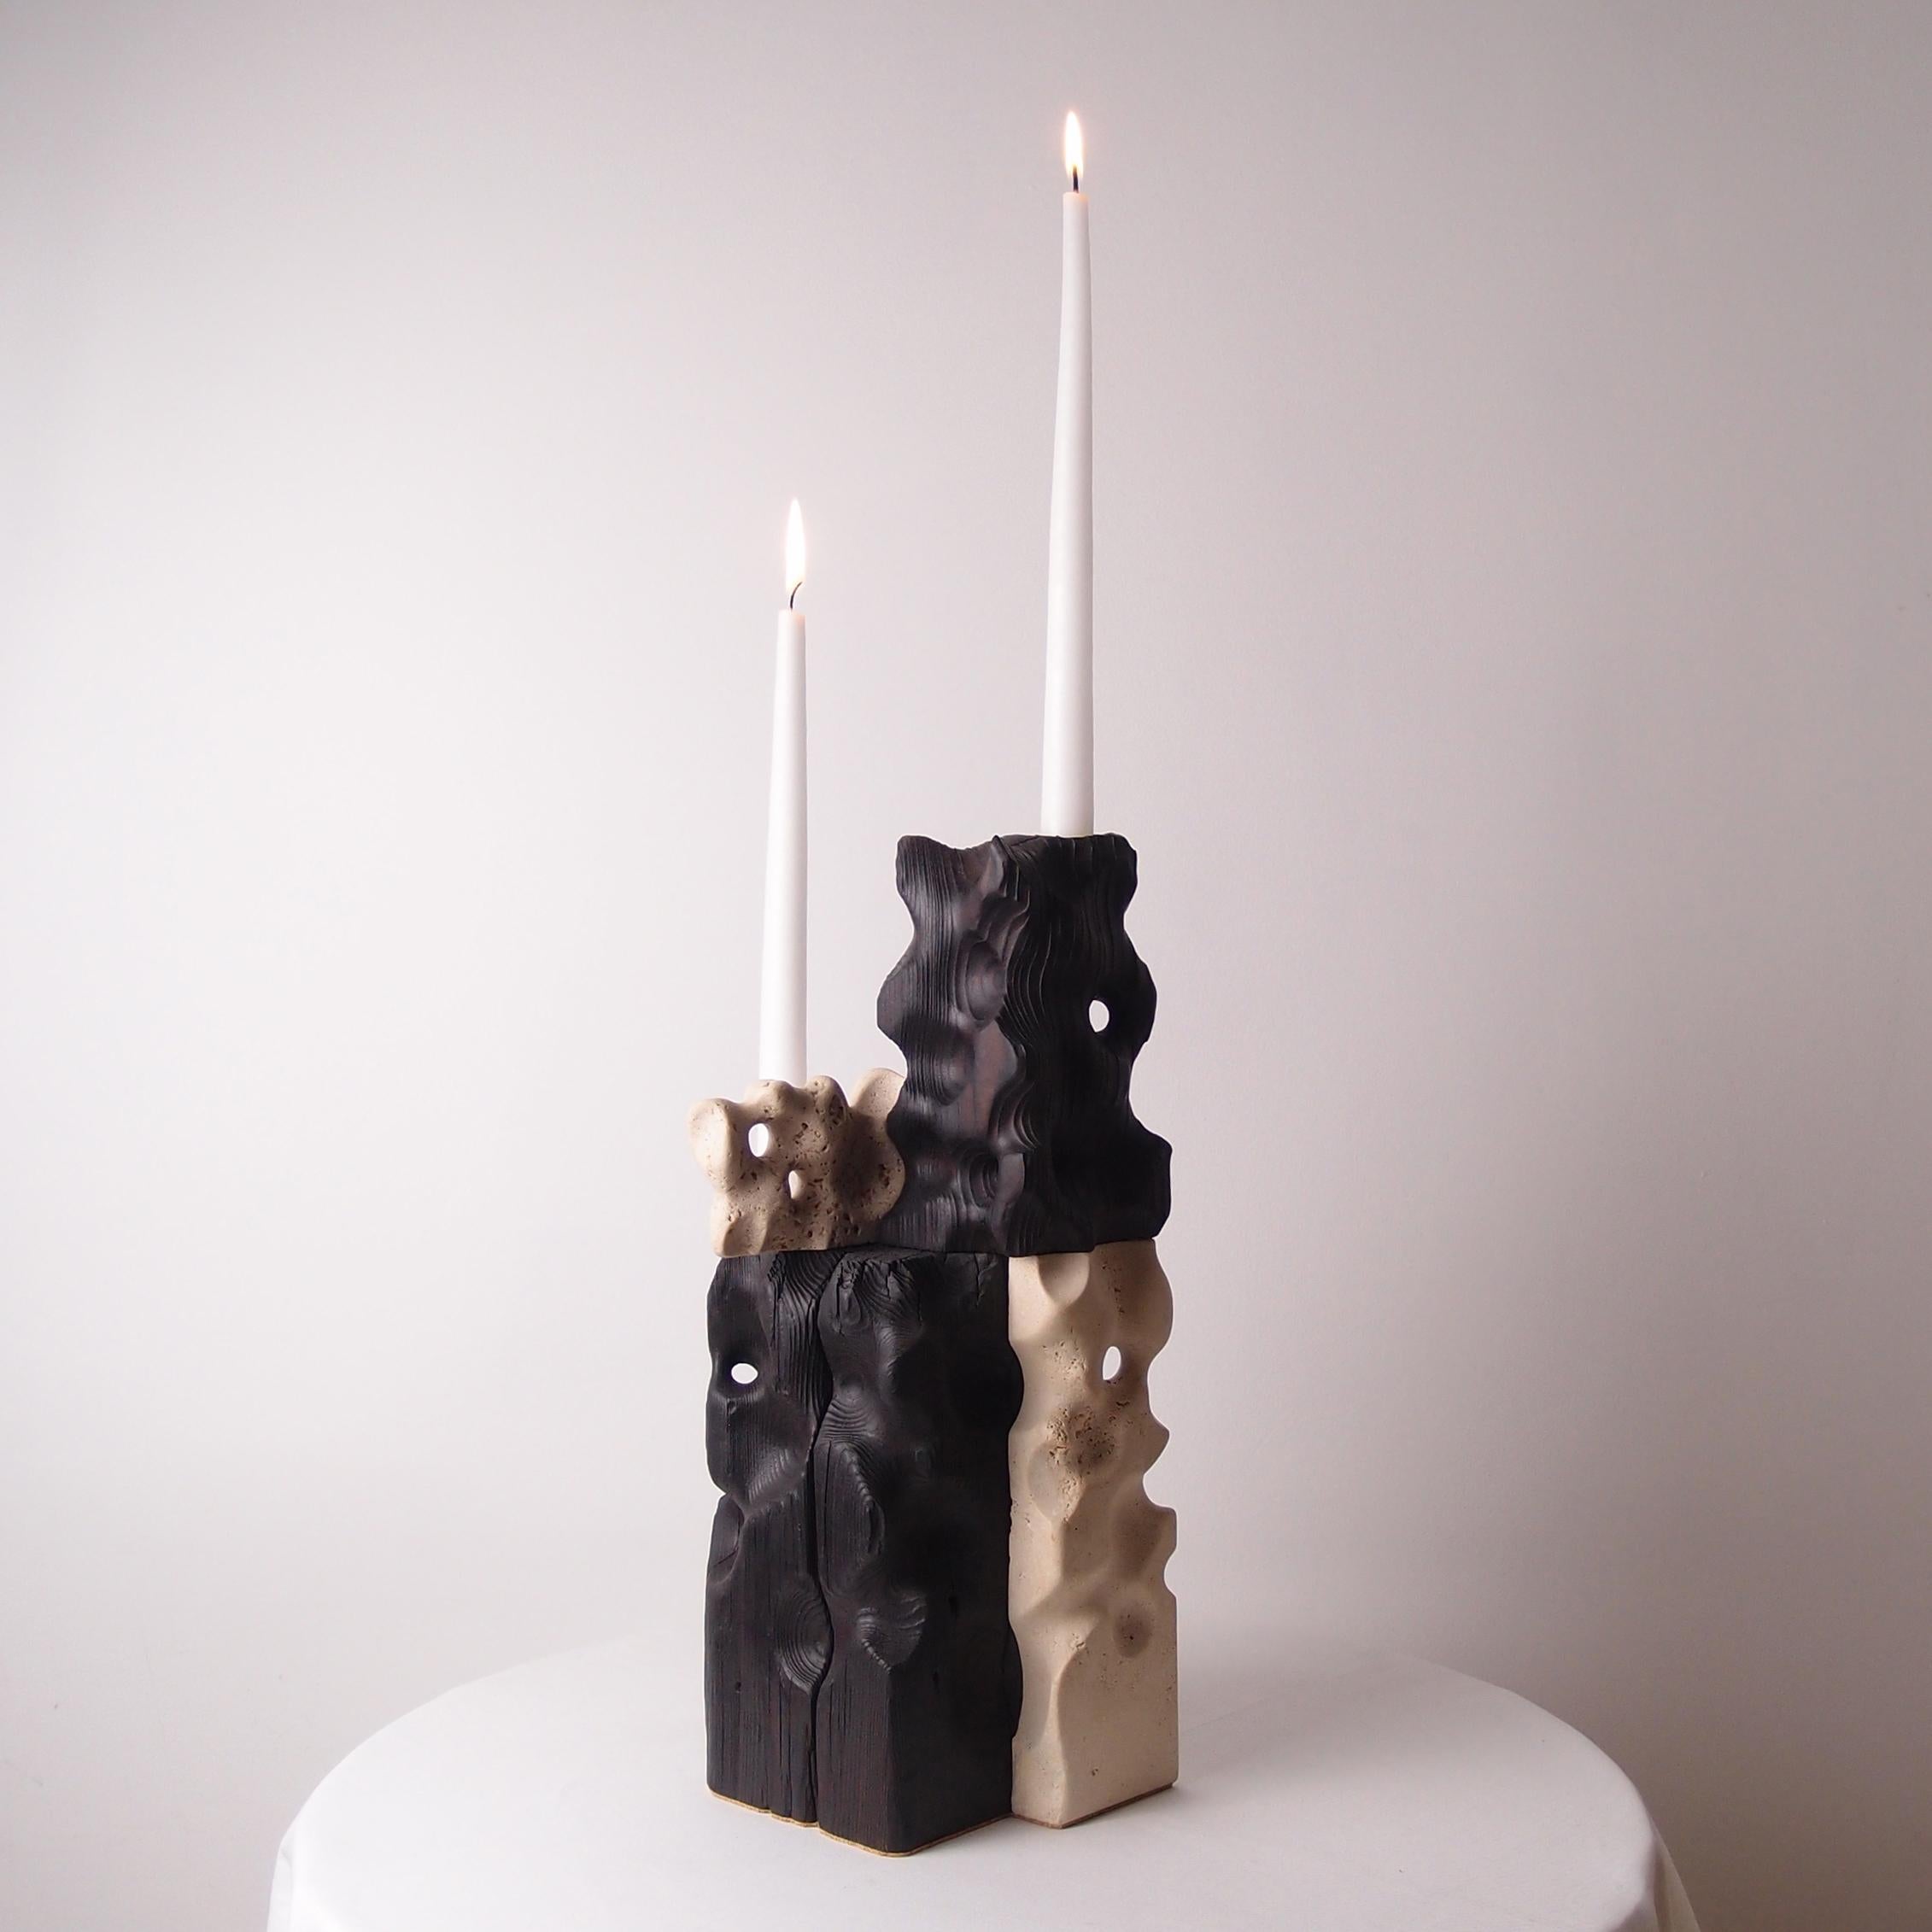 Organic Modern Holey Tower, Sculptured Candle Holder from Reclaimed Burned Wood and Limestone For Sale